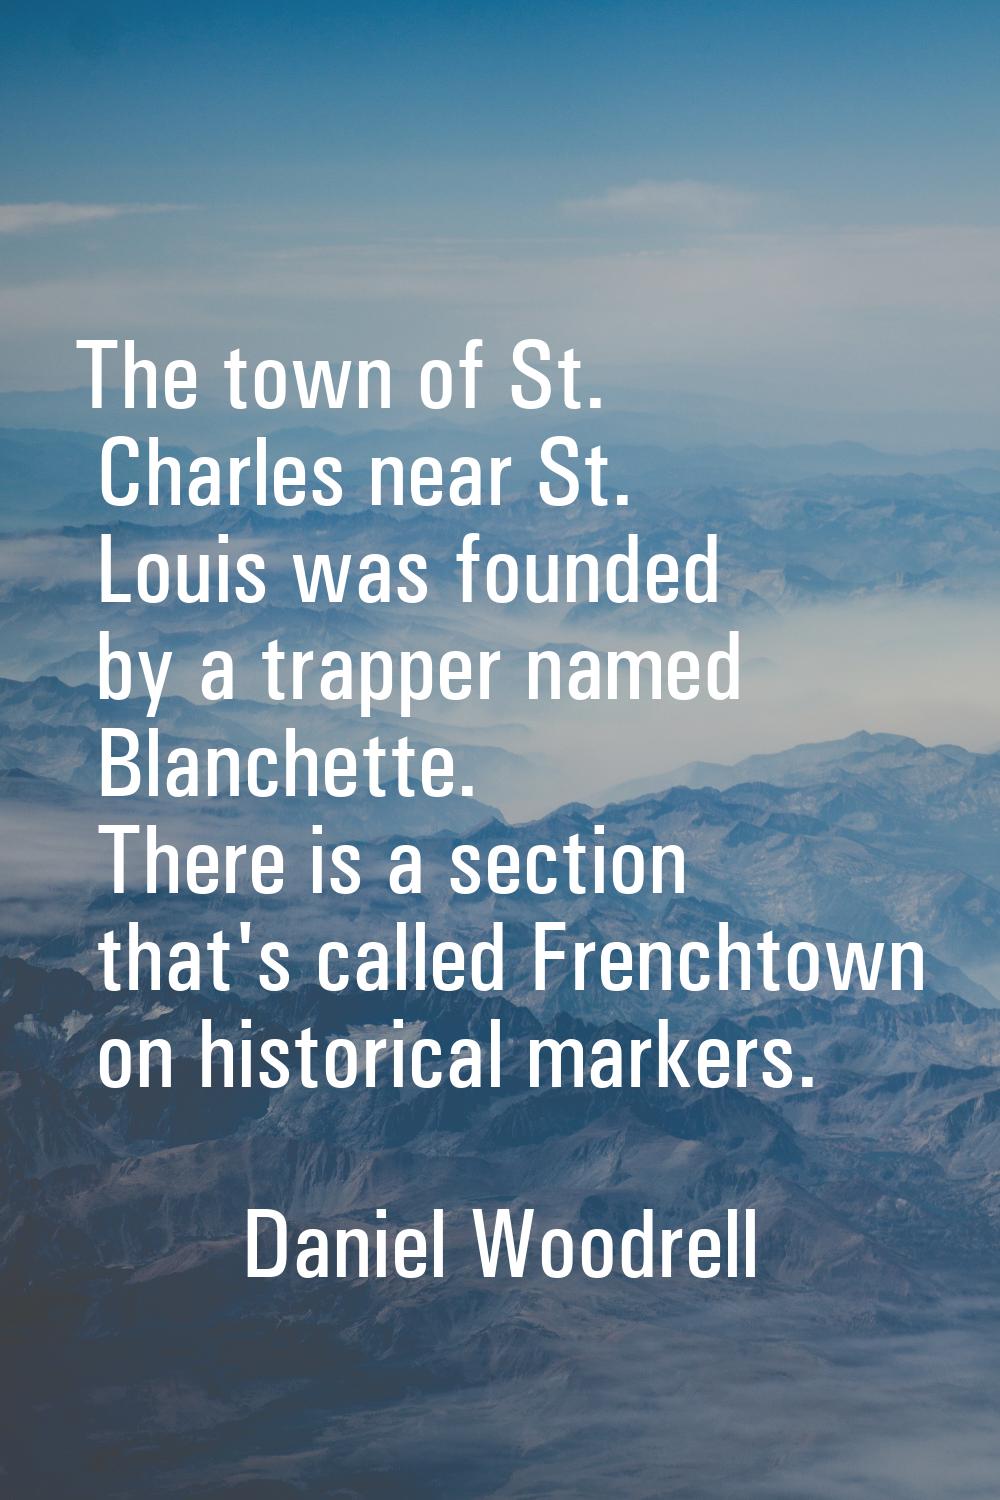 The town of St. Charles near St. Louis was founded by a trapper named Blanchette. There is a sectio